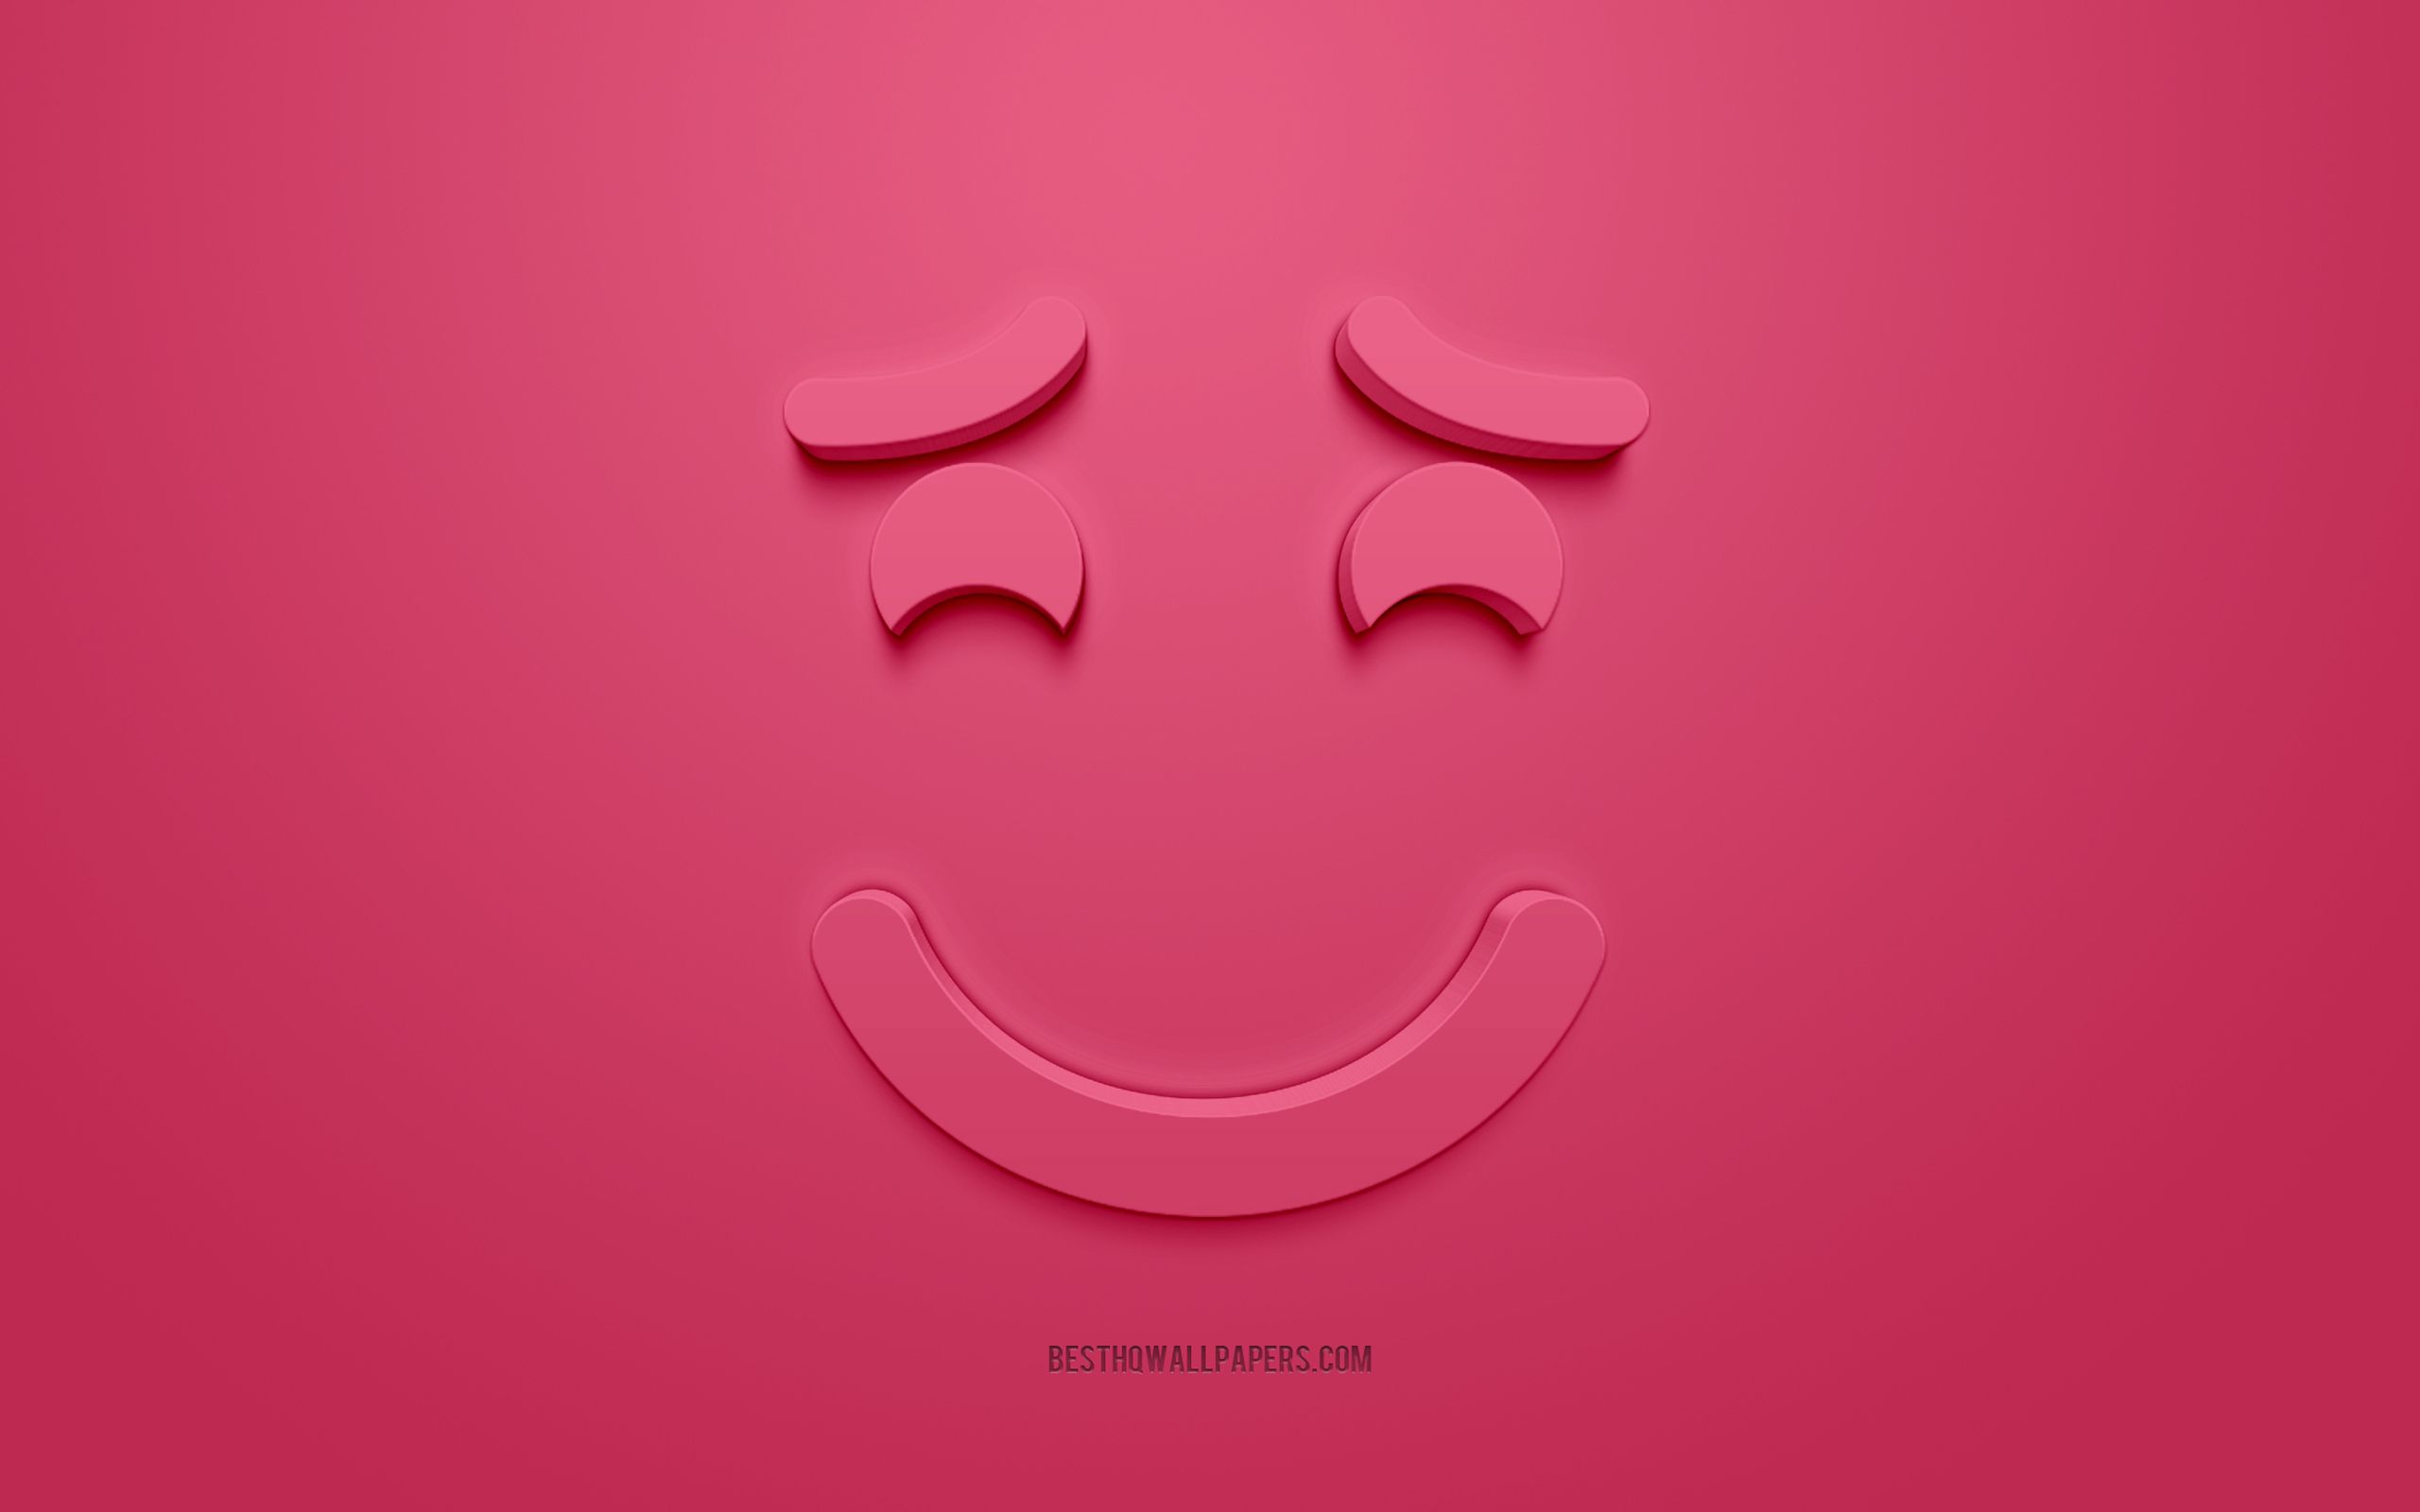 Download wallpaper Smiling emoticon with raised eyebrows, 3D